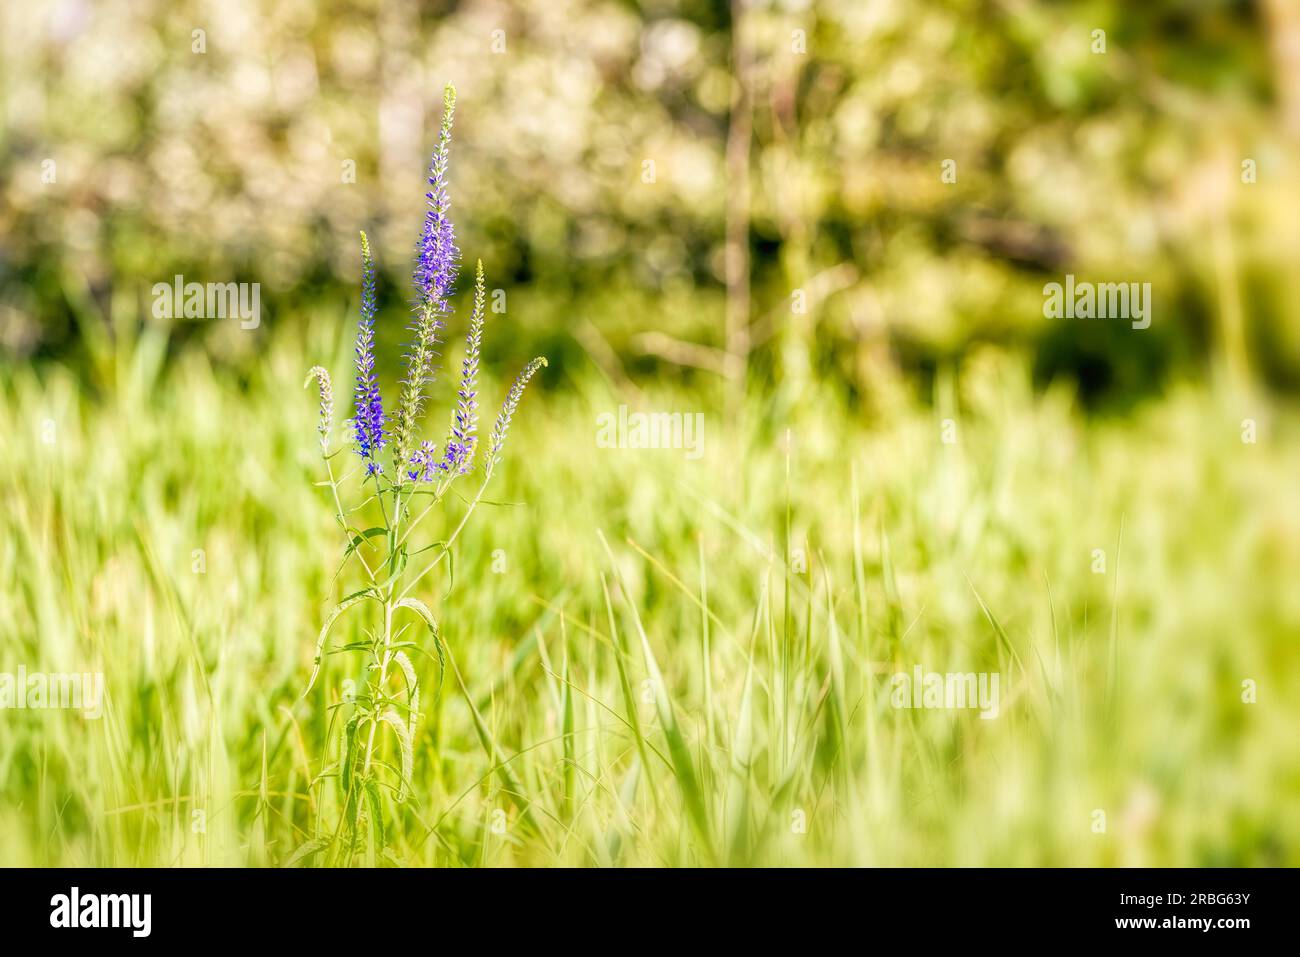 Pseudolysimachion longifolium also known as garden speedwell or longleaf speedwell (Veronica longifolia), growing in the meadow under the warm summer Stock Photo